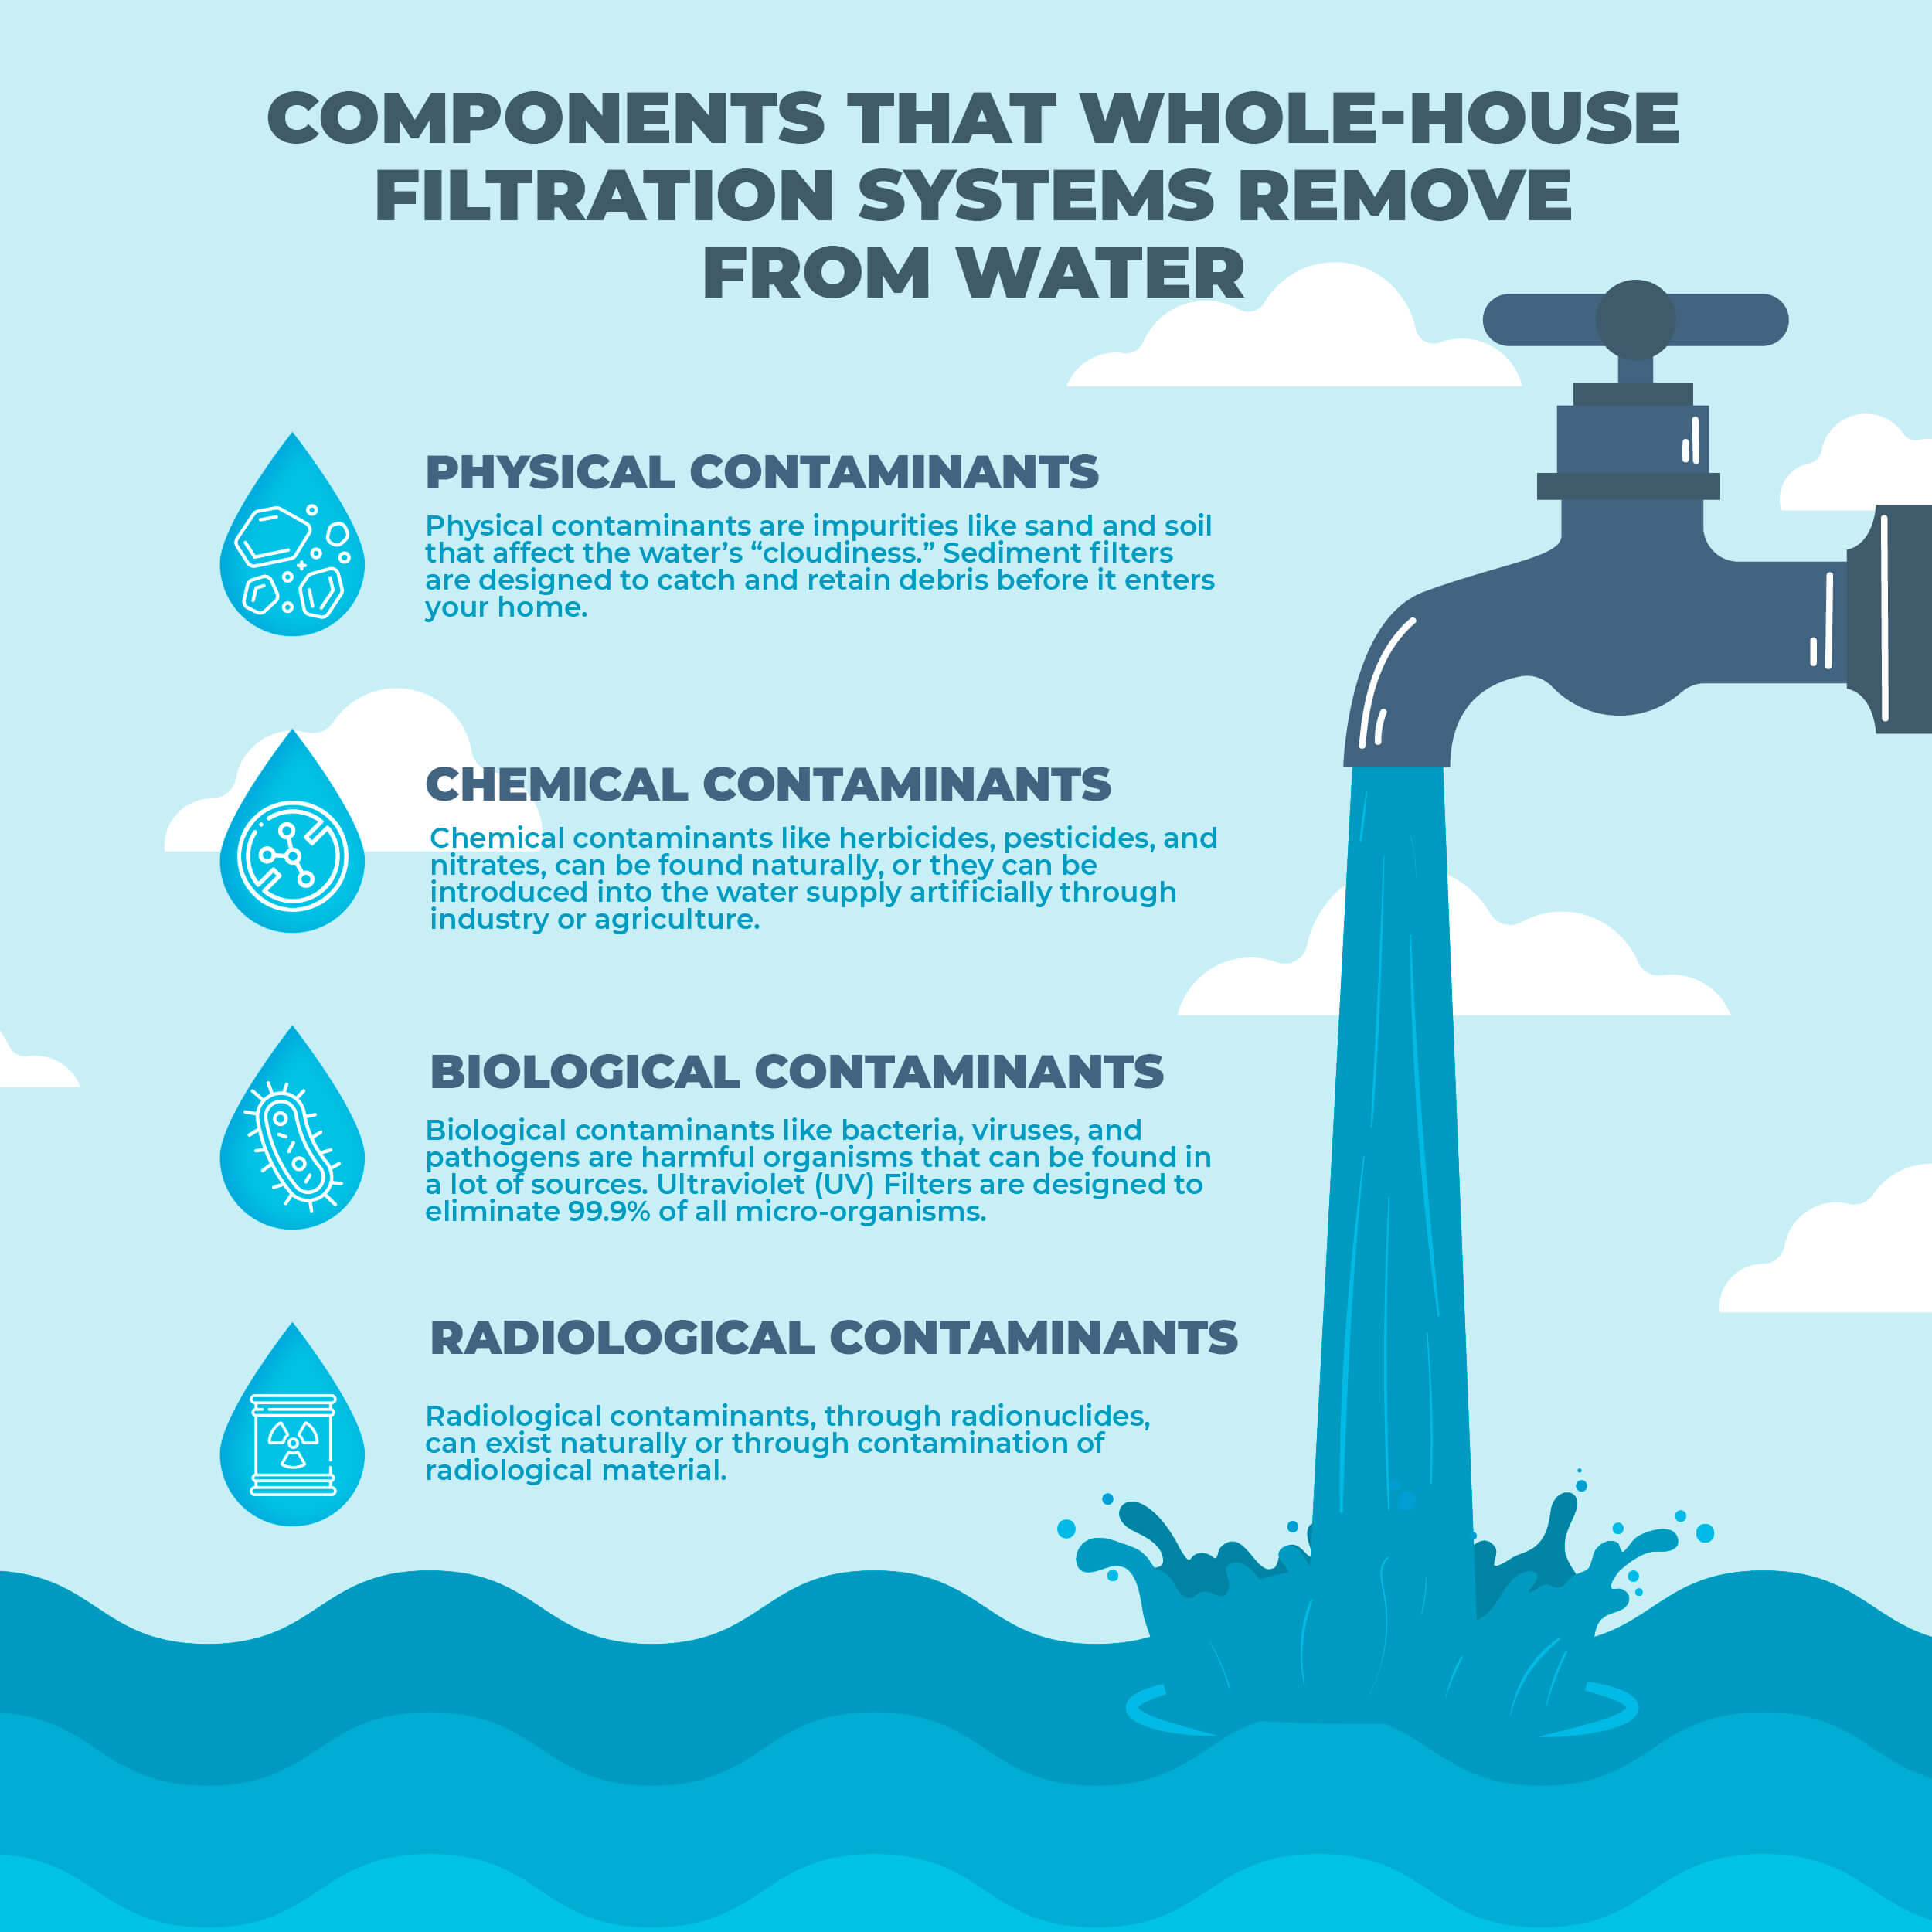 Components that Whole-House Filtration Systems Remove from Water